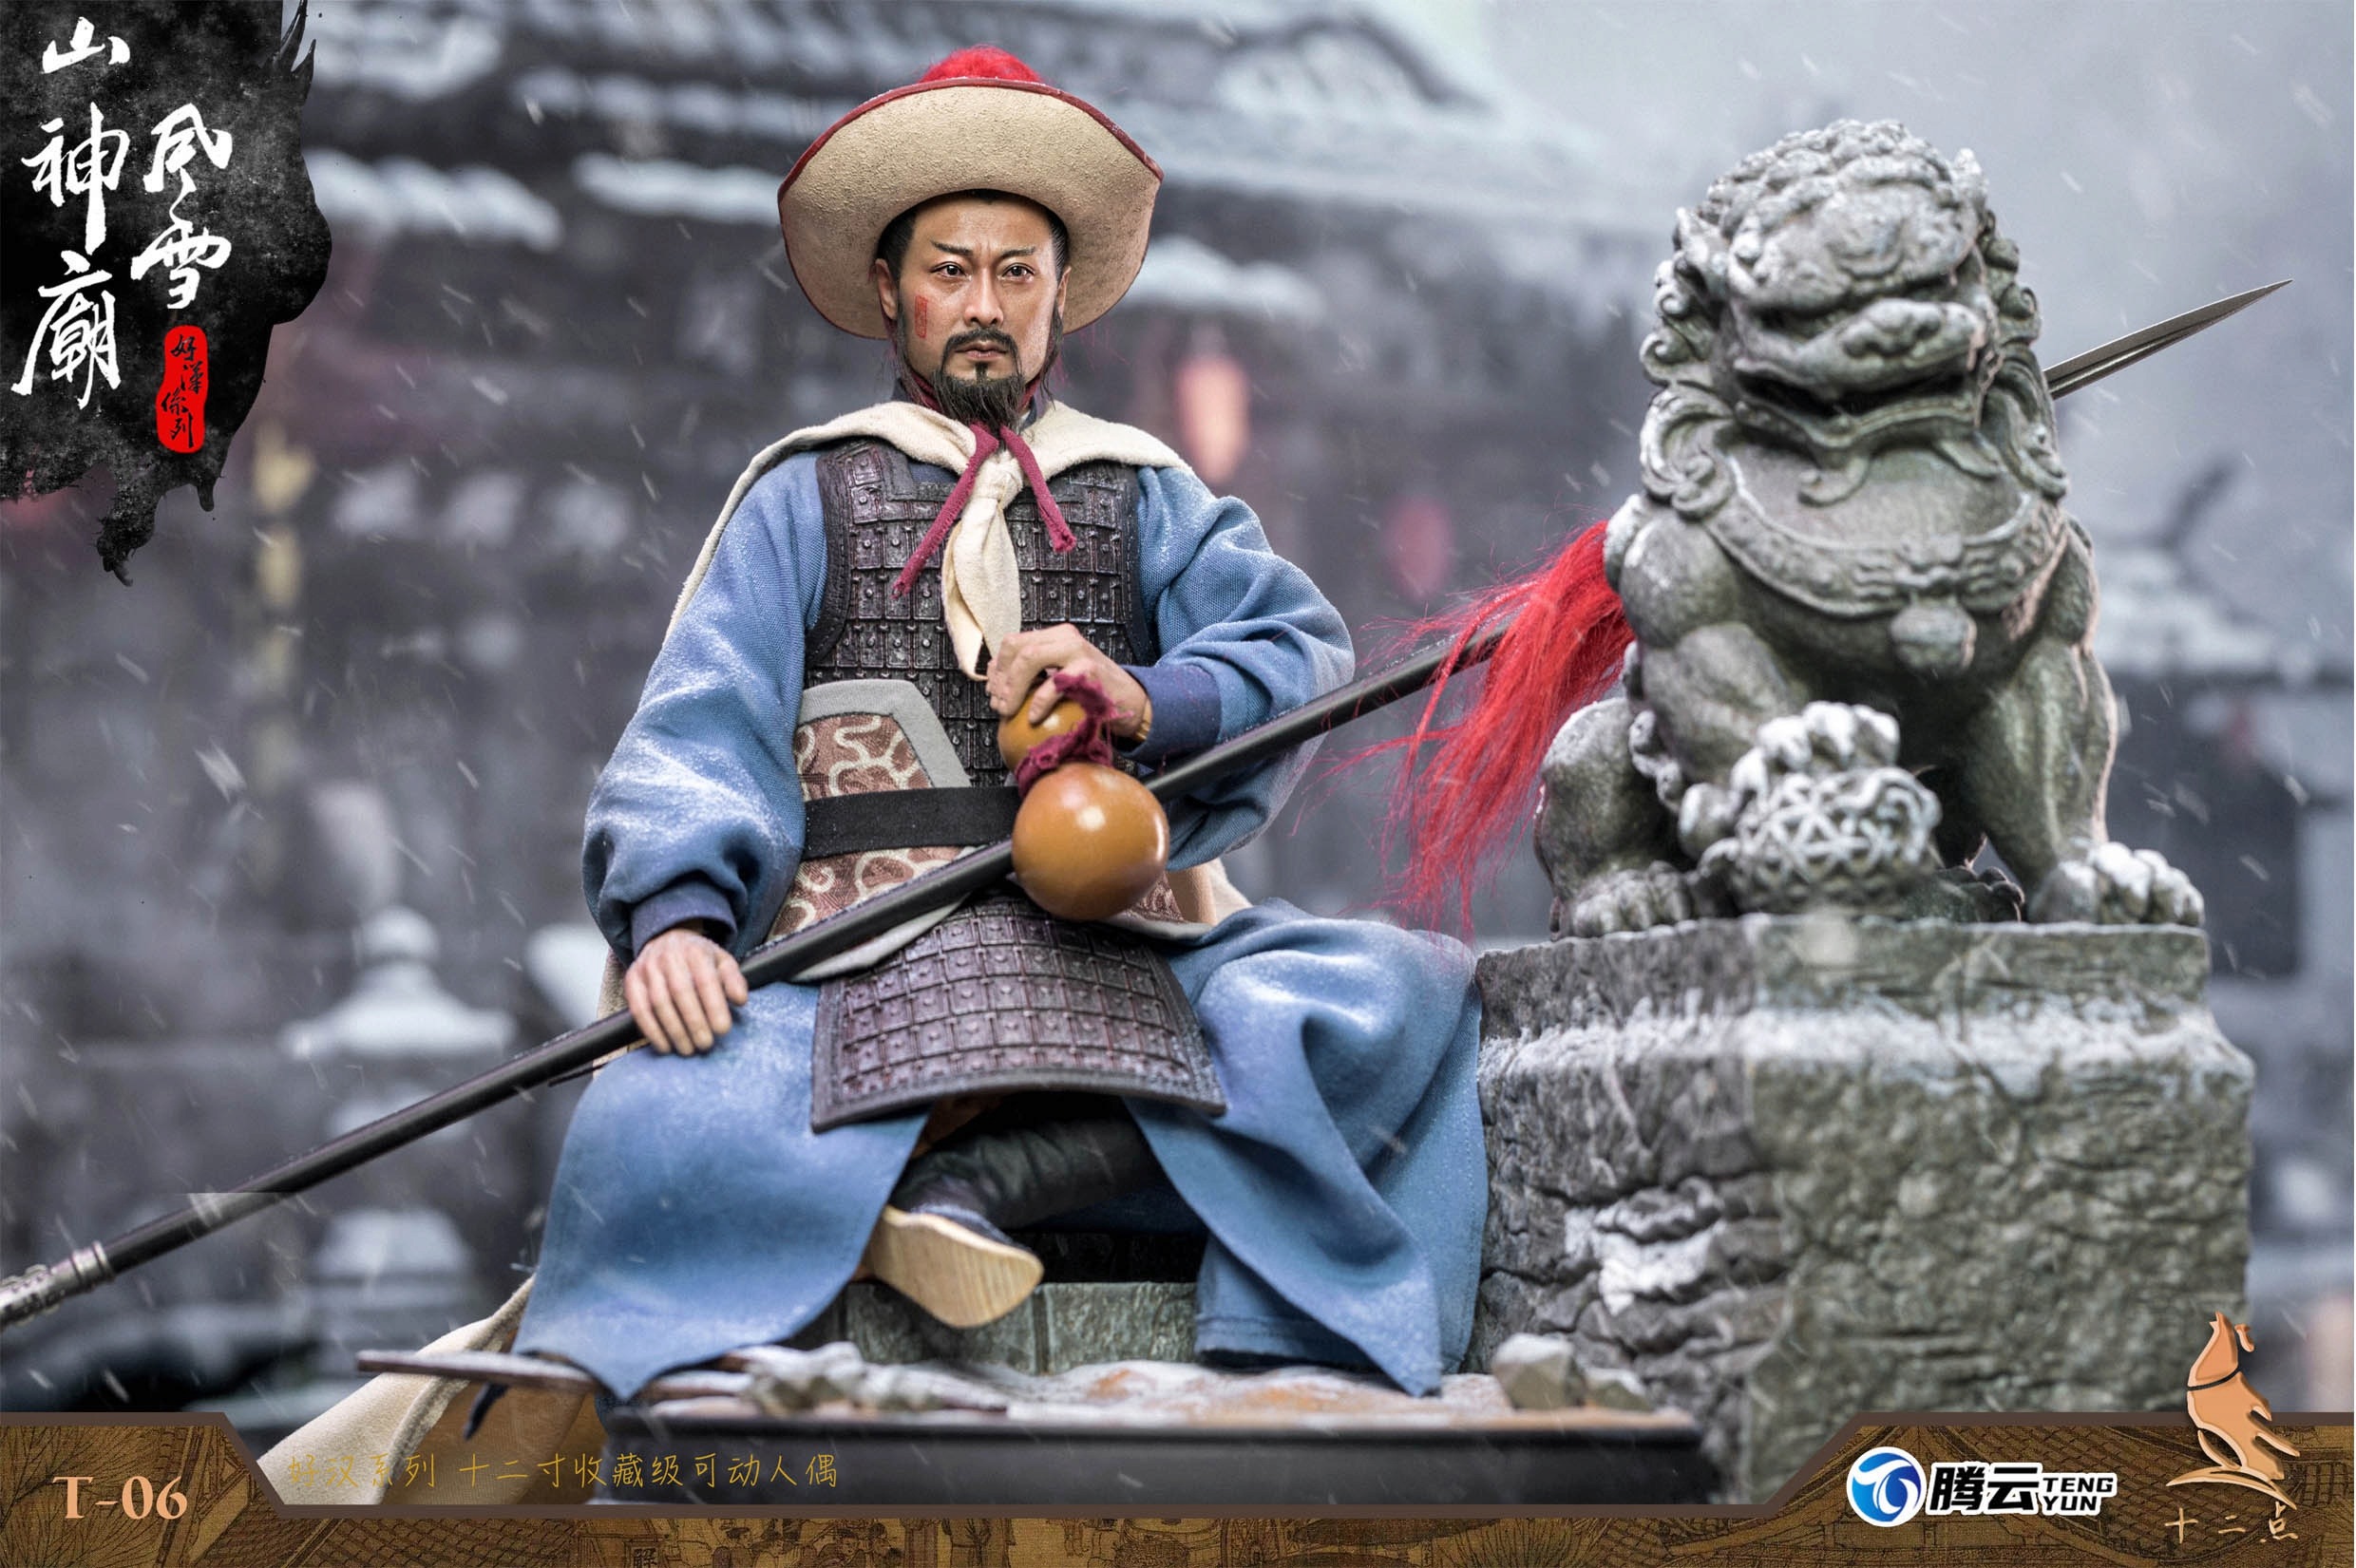 NEW PRODUCT: Twelve - Hero Series - Leopard Head Lin Chong Fengxue Mountain Temple Action Figure (T-05 /T-06) 3024